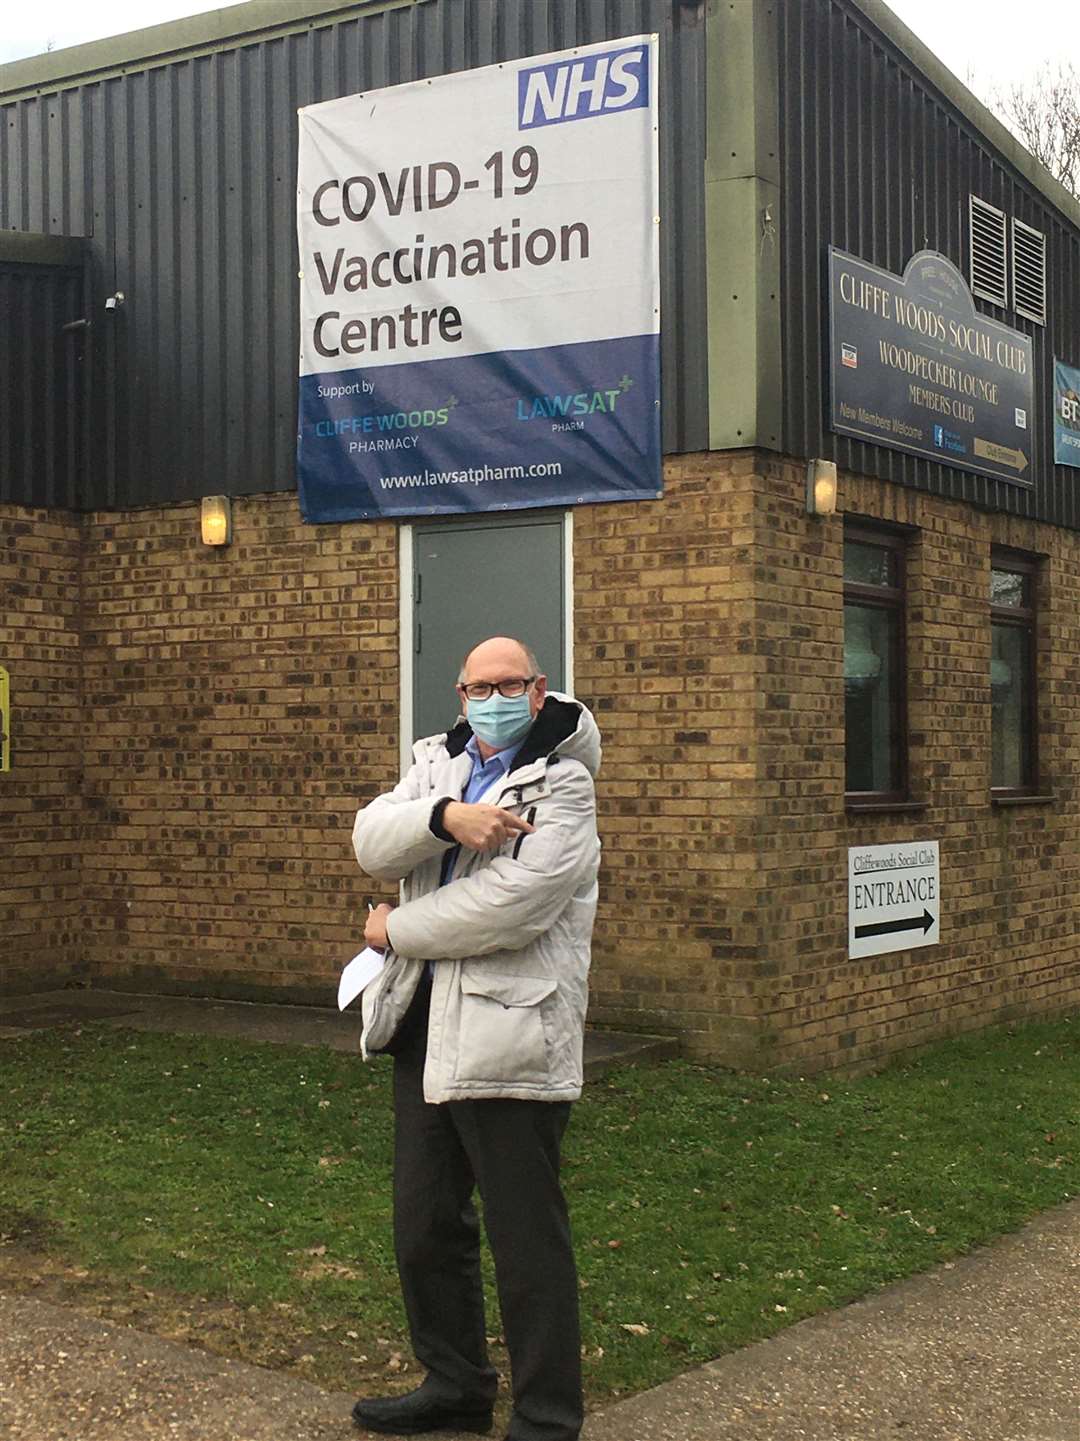 John Nurden about to be jabbed at the Covid-19 vaccination centre at Cliffe Woods Community Centre